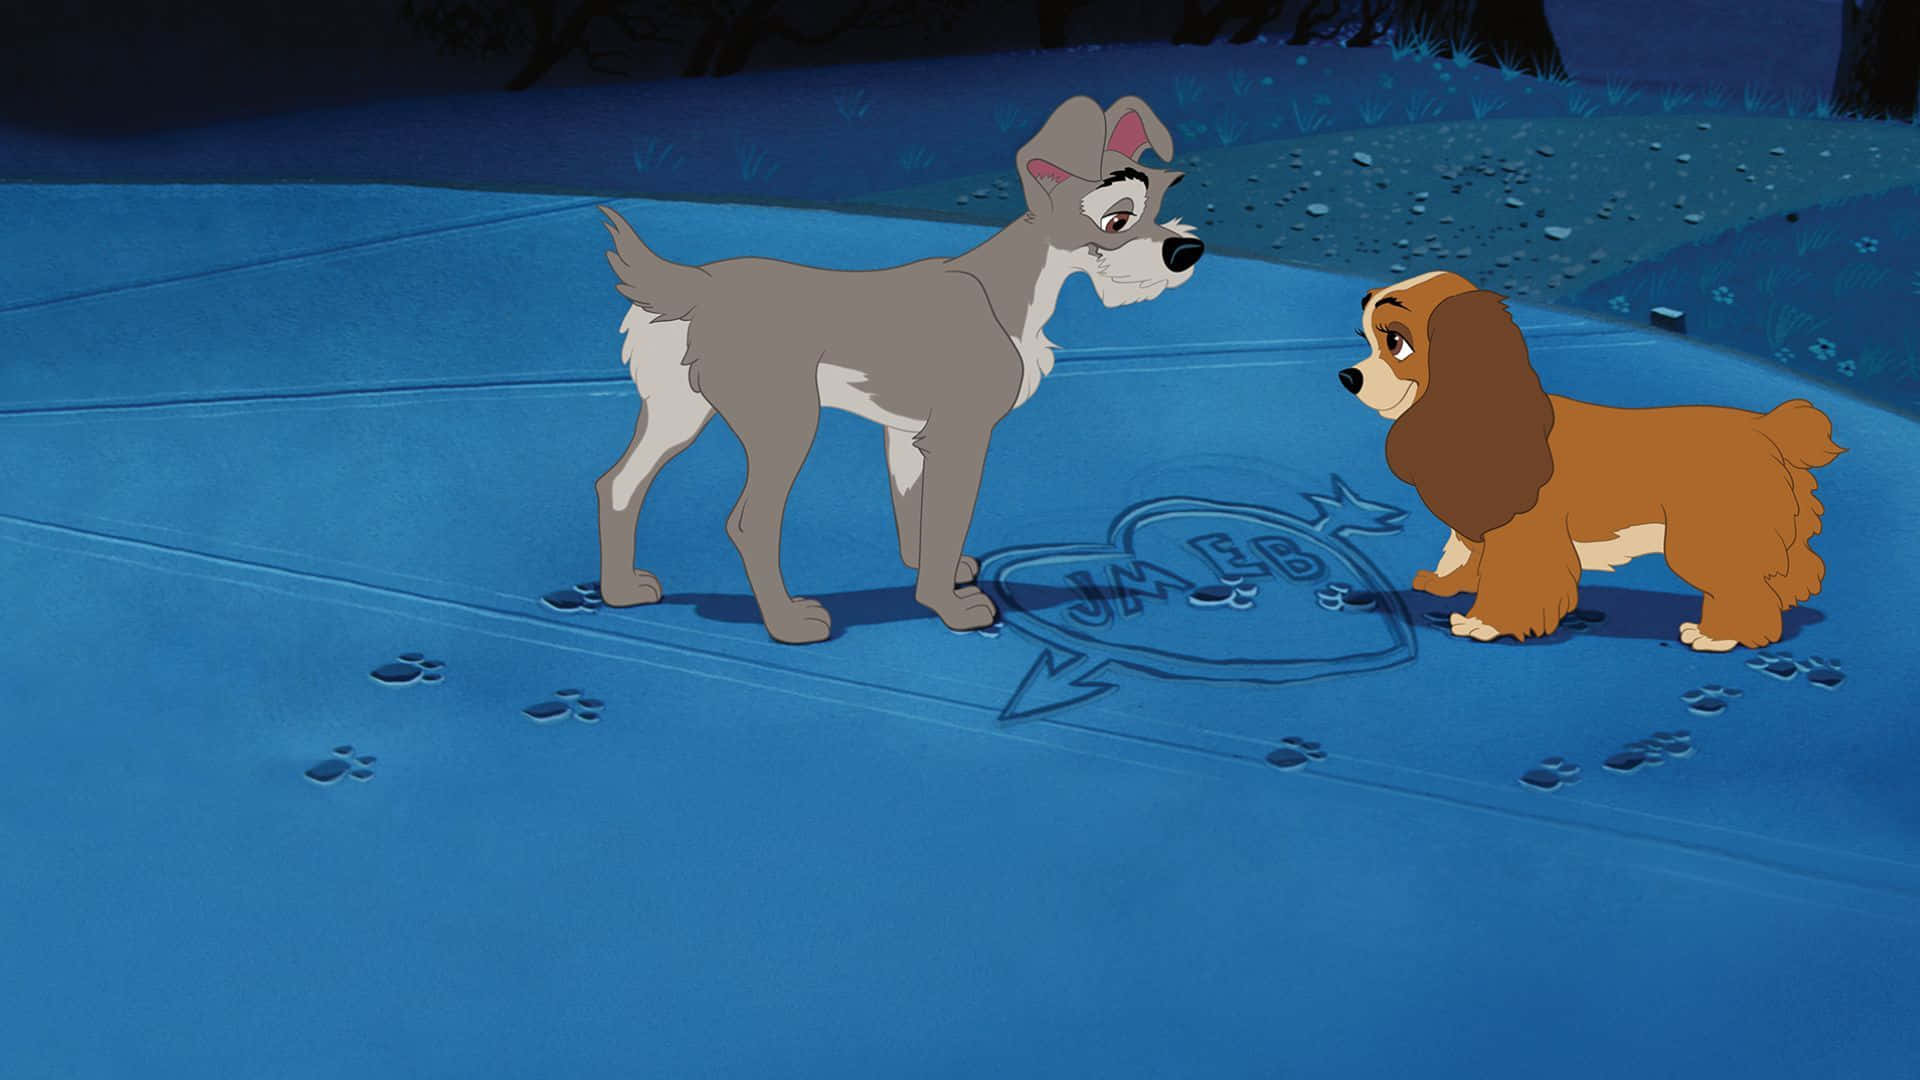 lady and the tramp wallpaper